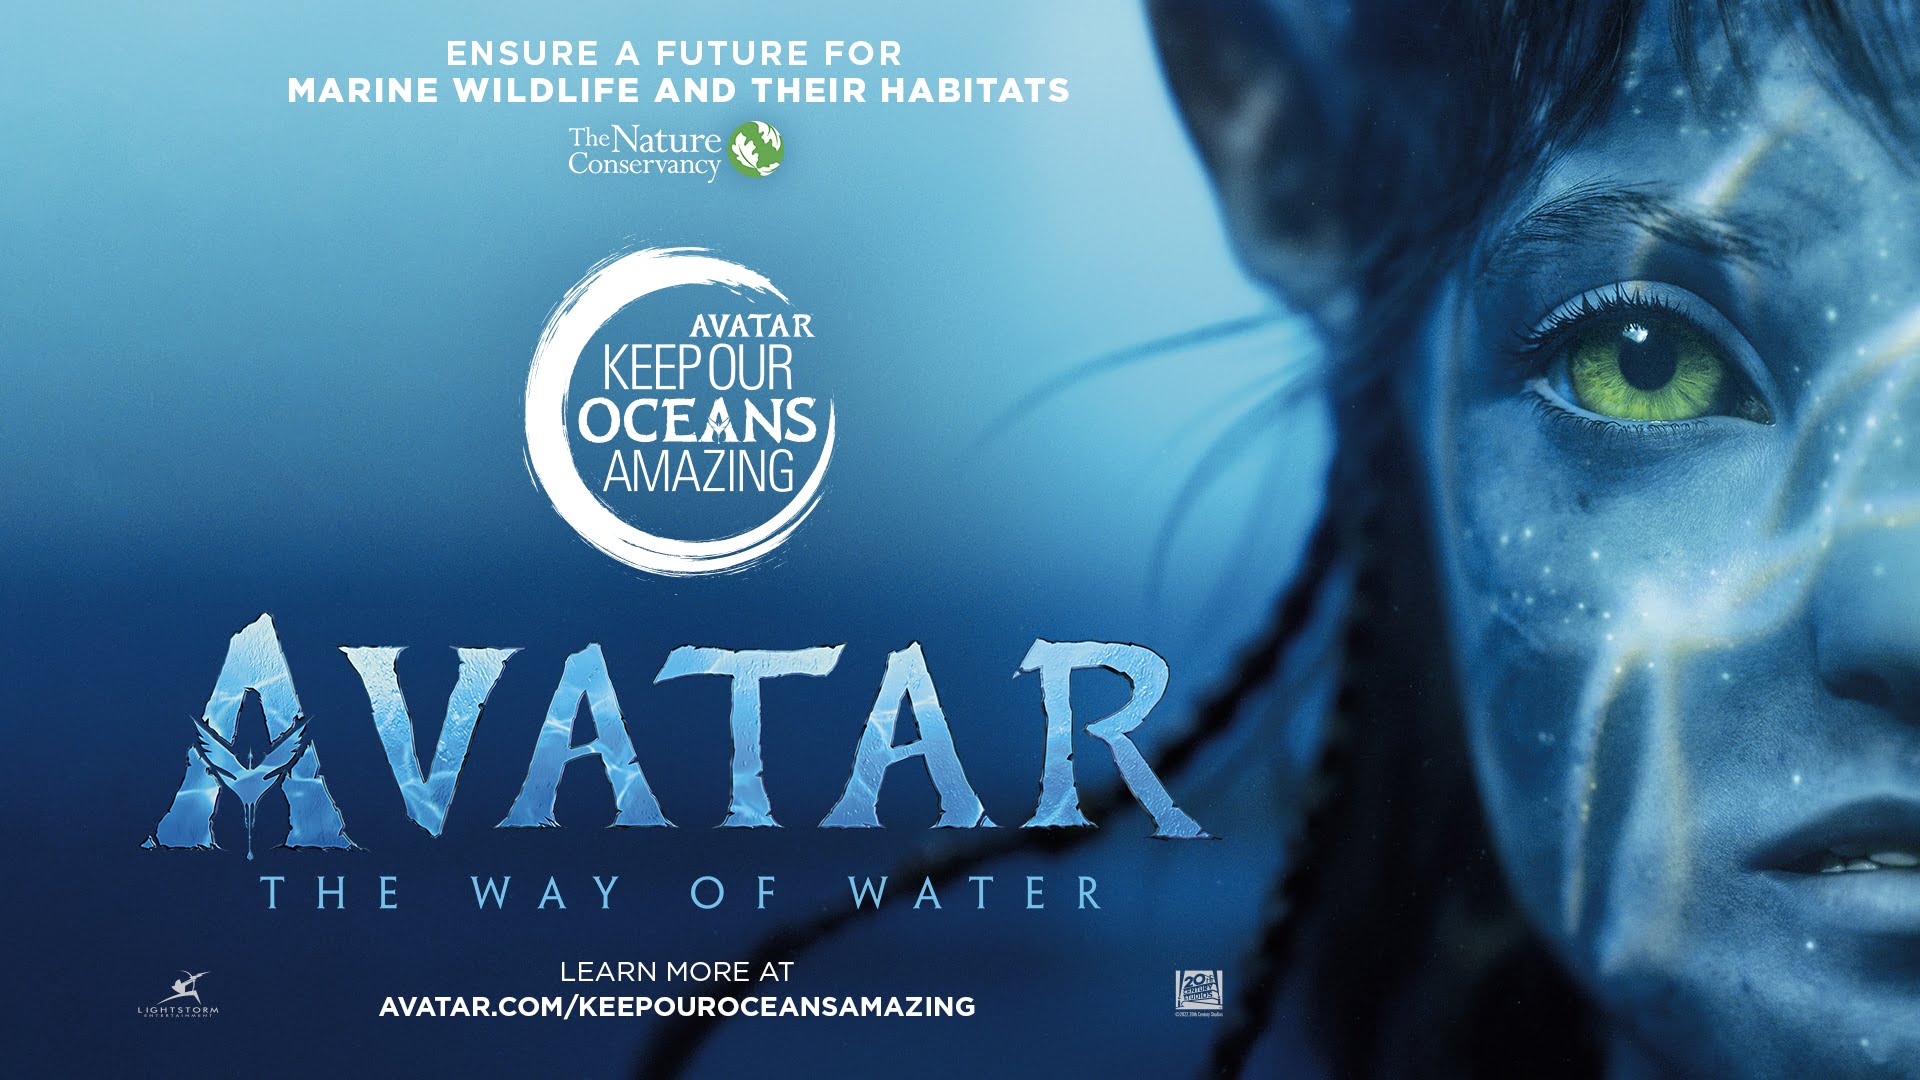 A massive overhaul of Disney's film releases, with the last series of 'Avatar' in 2031 2